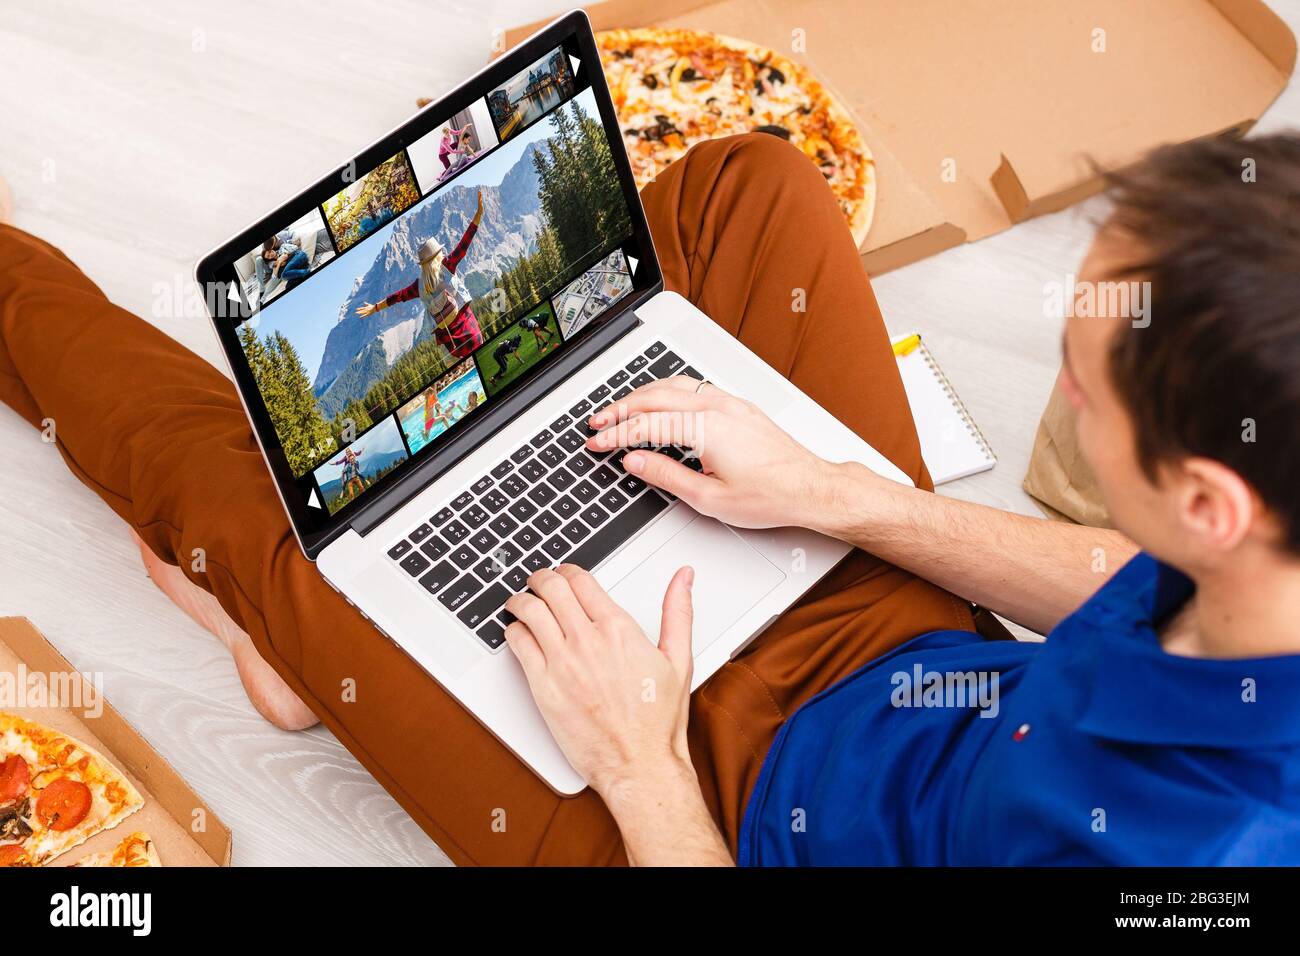 Man watching TV channels by laptop online Stock Photo - Alamy